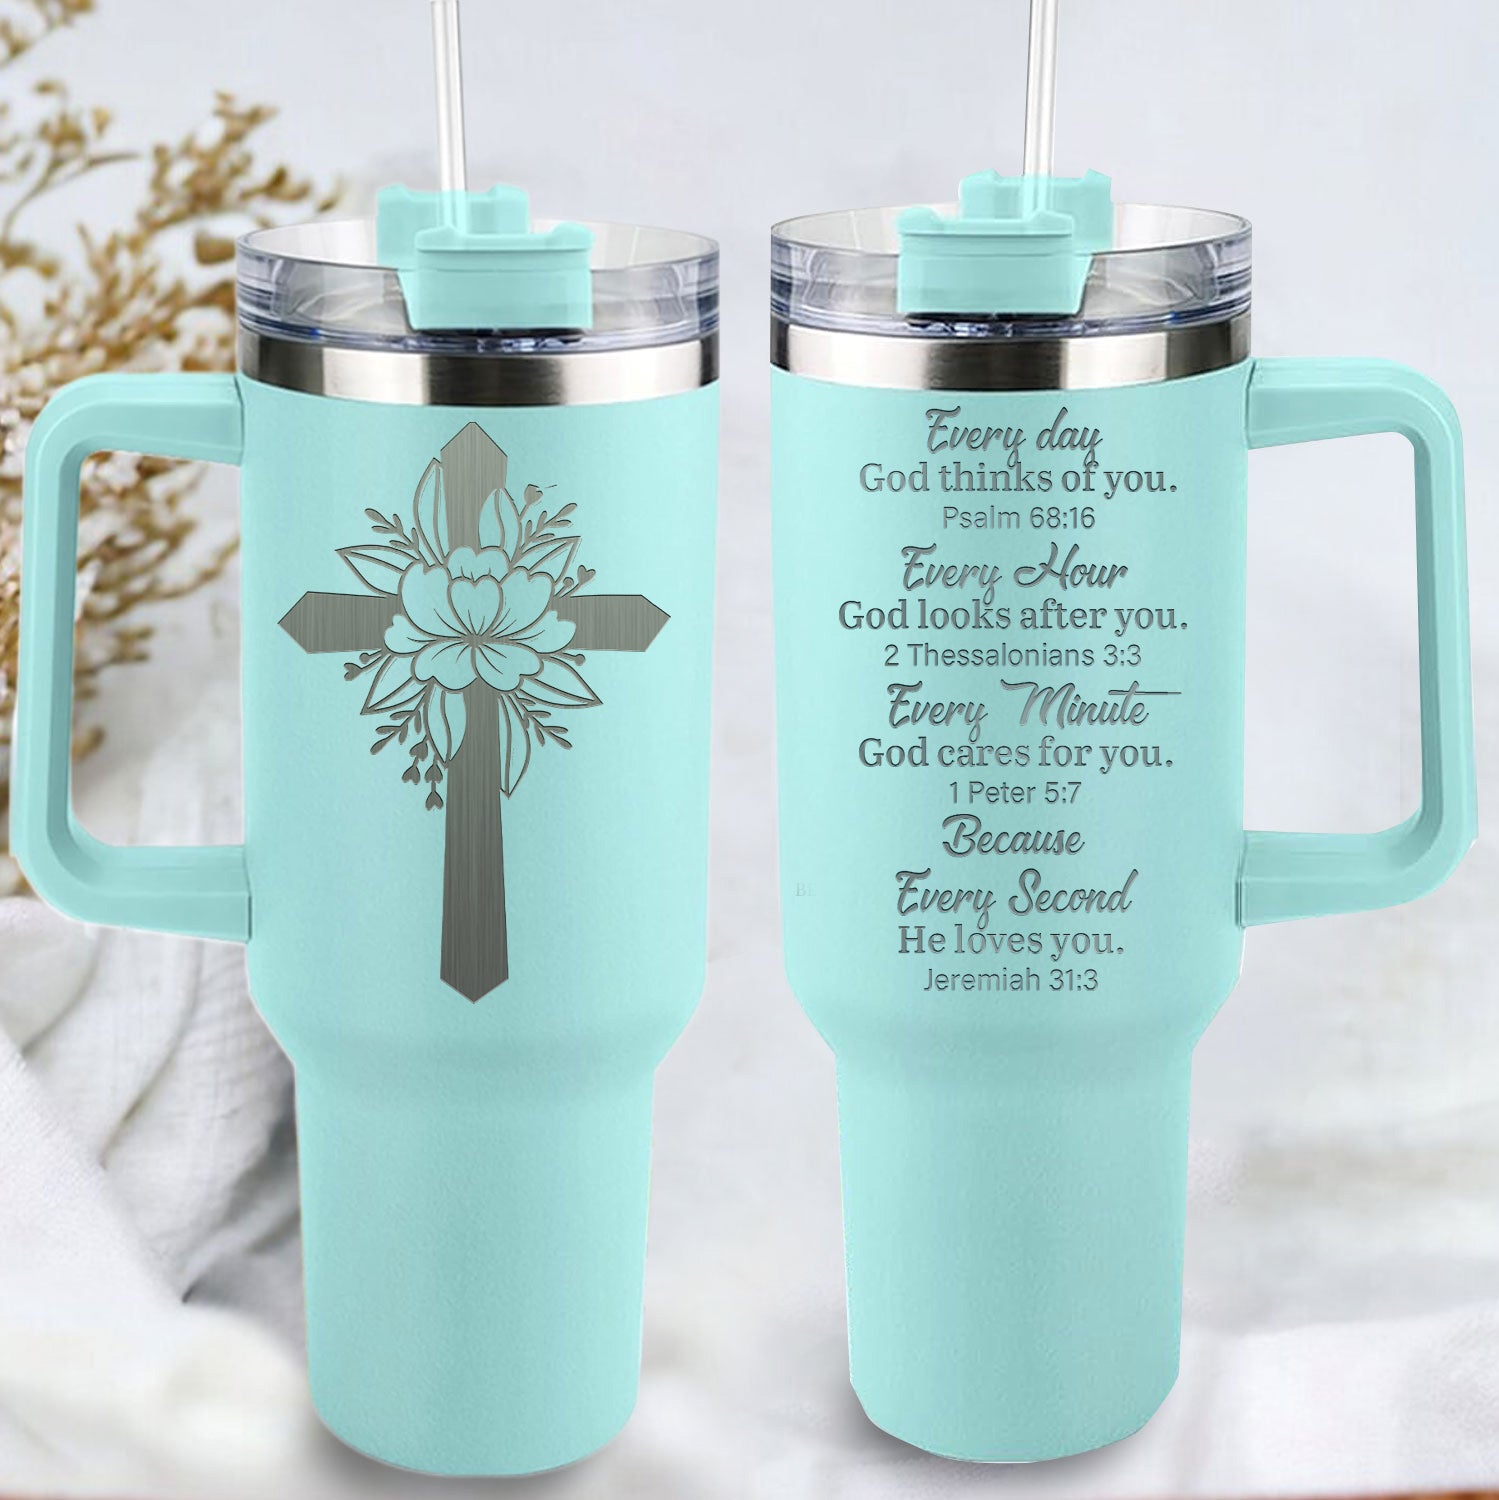 Everyday God thinks of you Christian 40oz Tumbler Travel Cup - Birthday, Christmas Gifts for Women - Religious, Self Care Inspiration Gifts